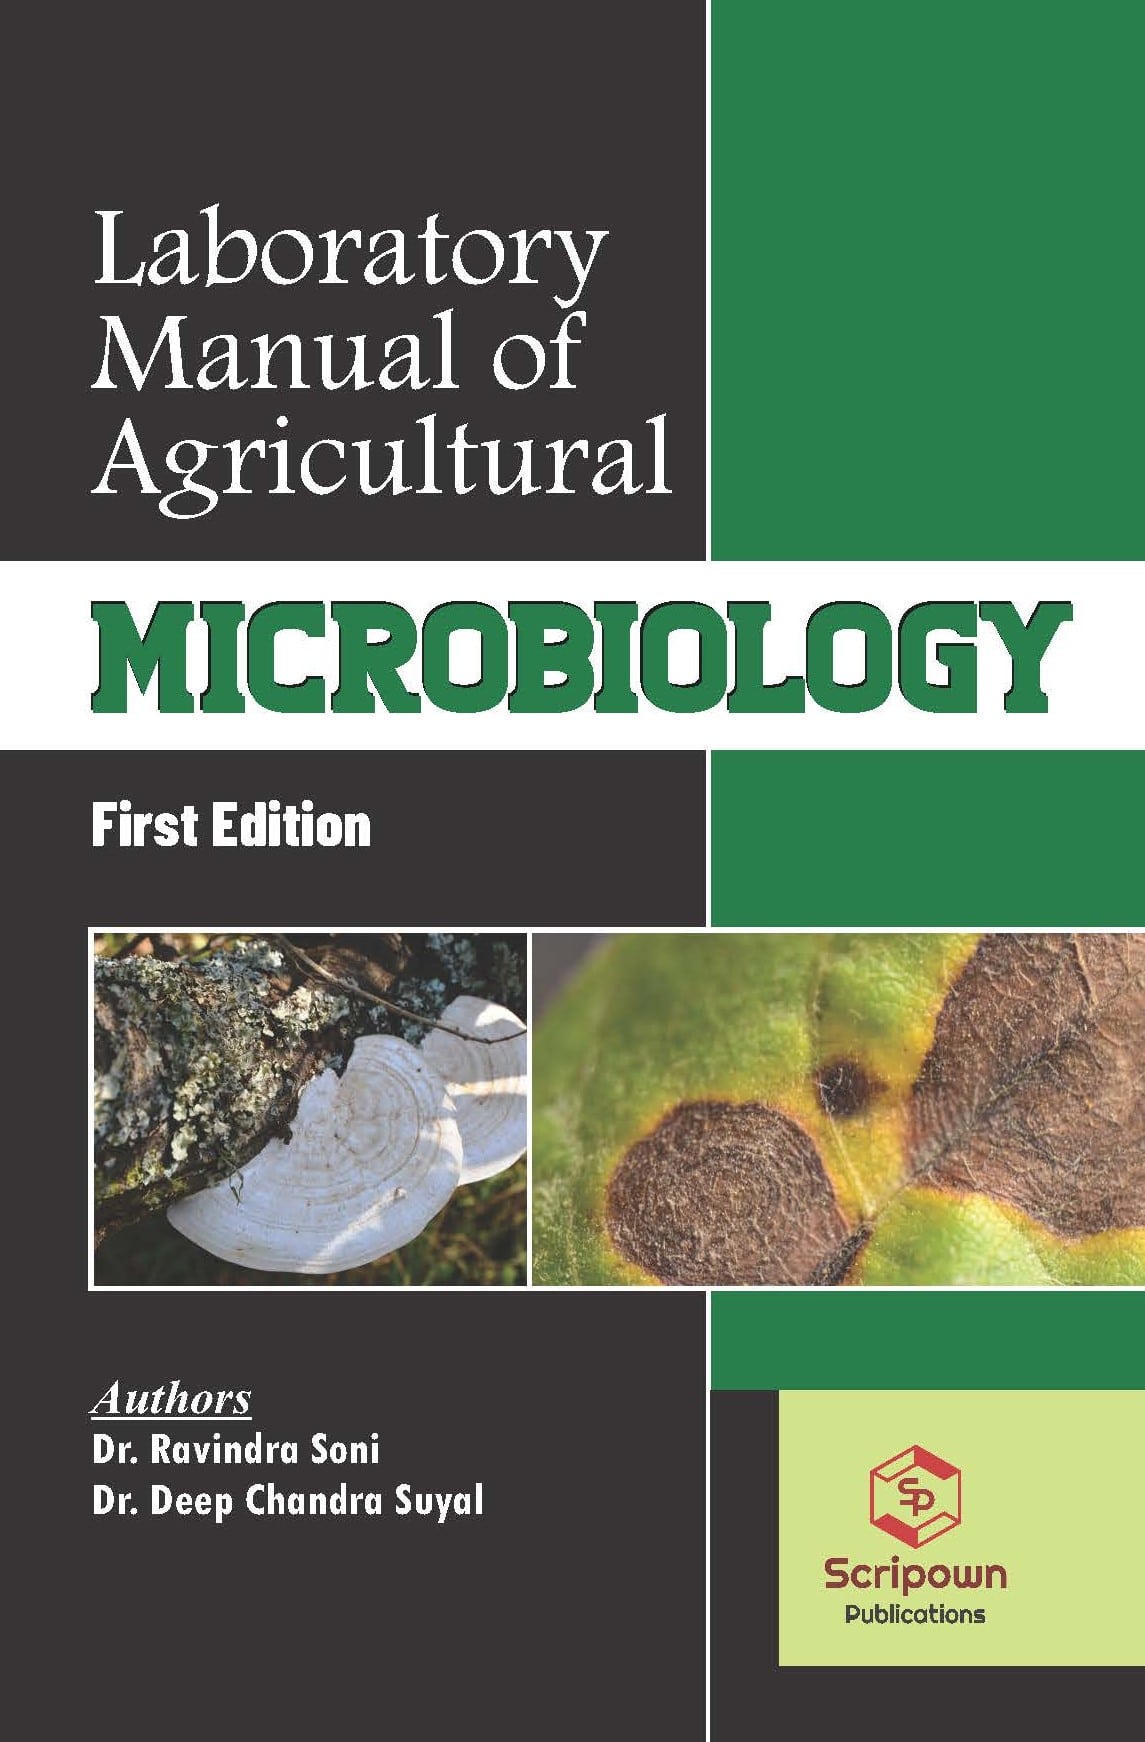 Laboratory Manual of Agricultural Microbiology